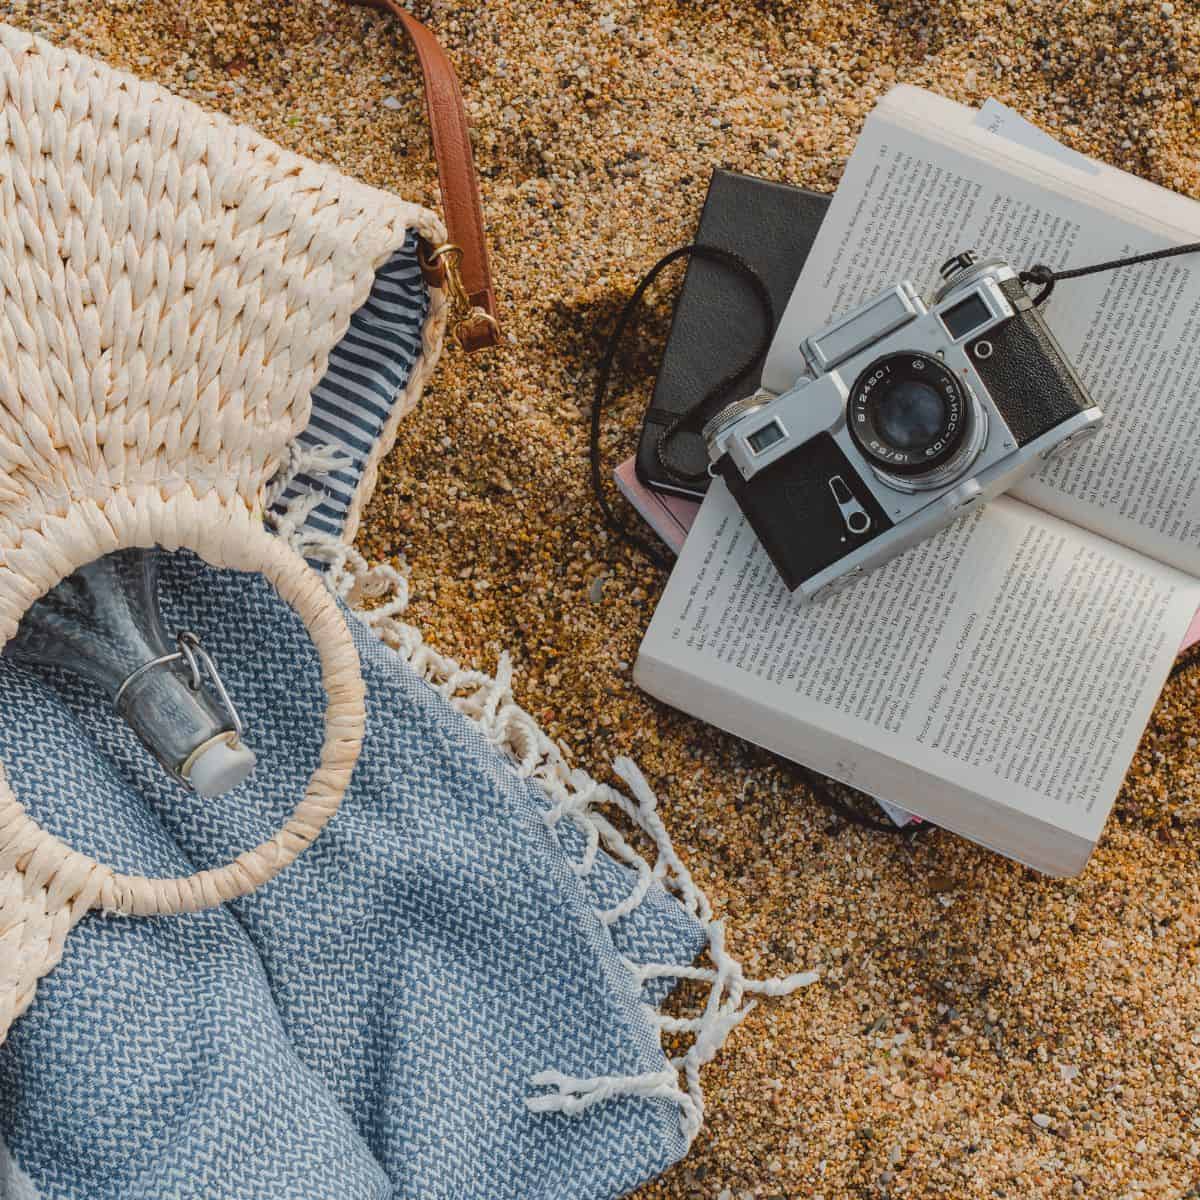 20 Must Have Beach Bag Essentials to Pack This Summer